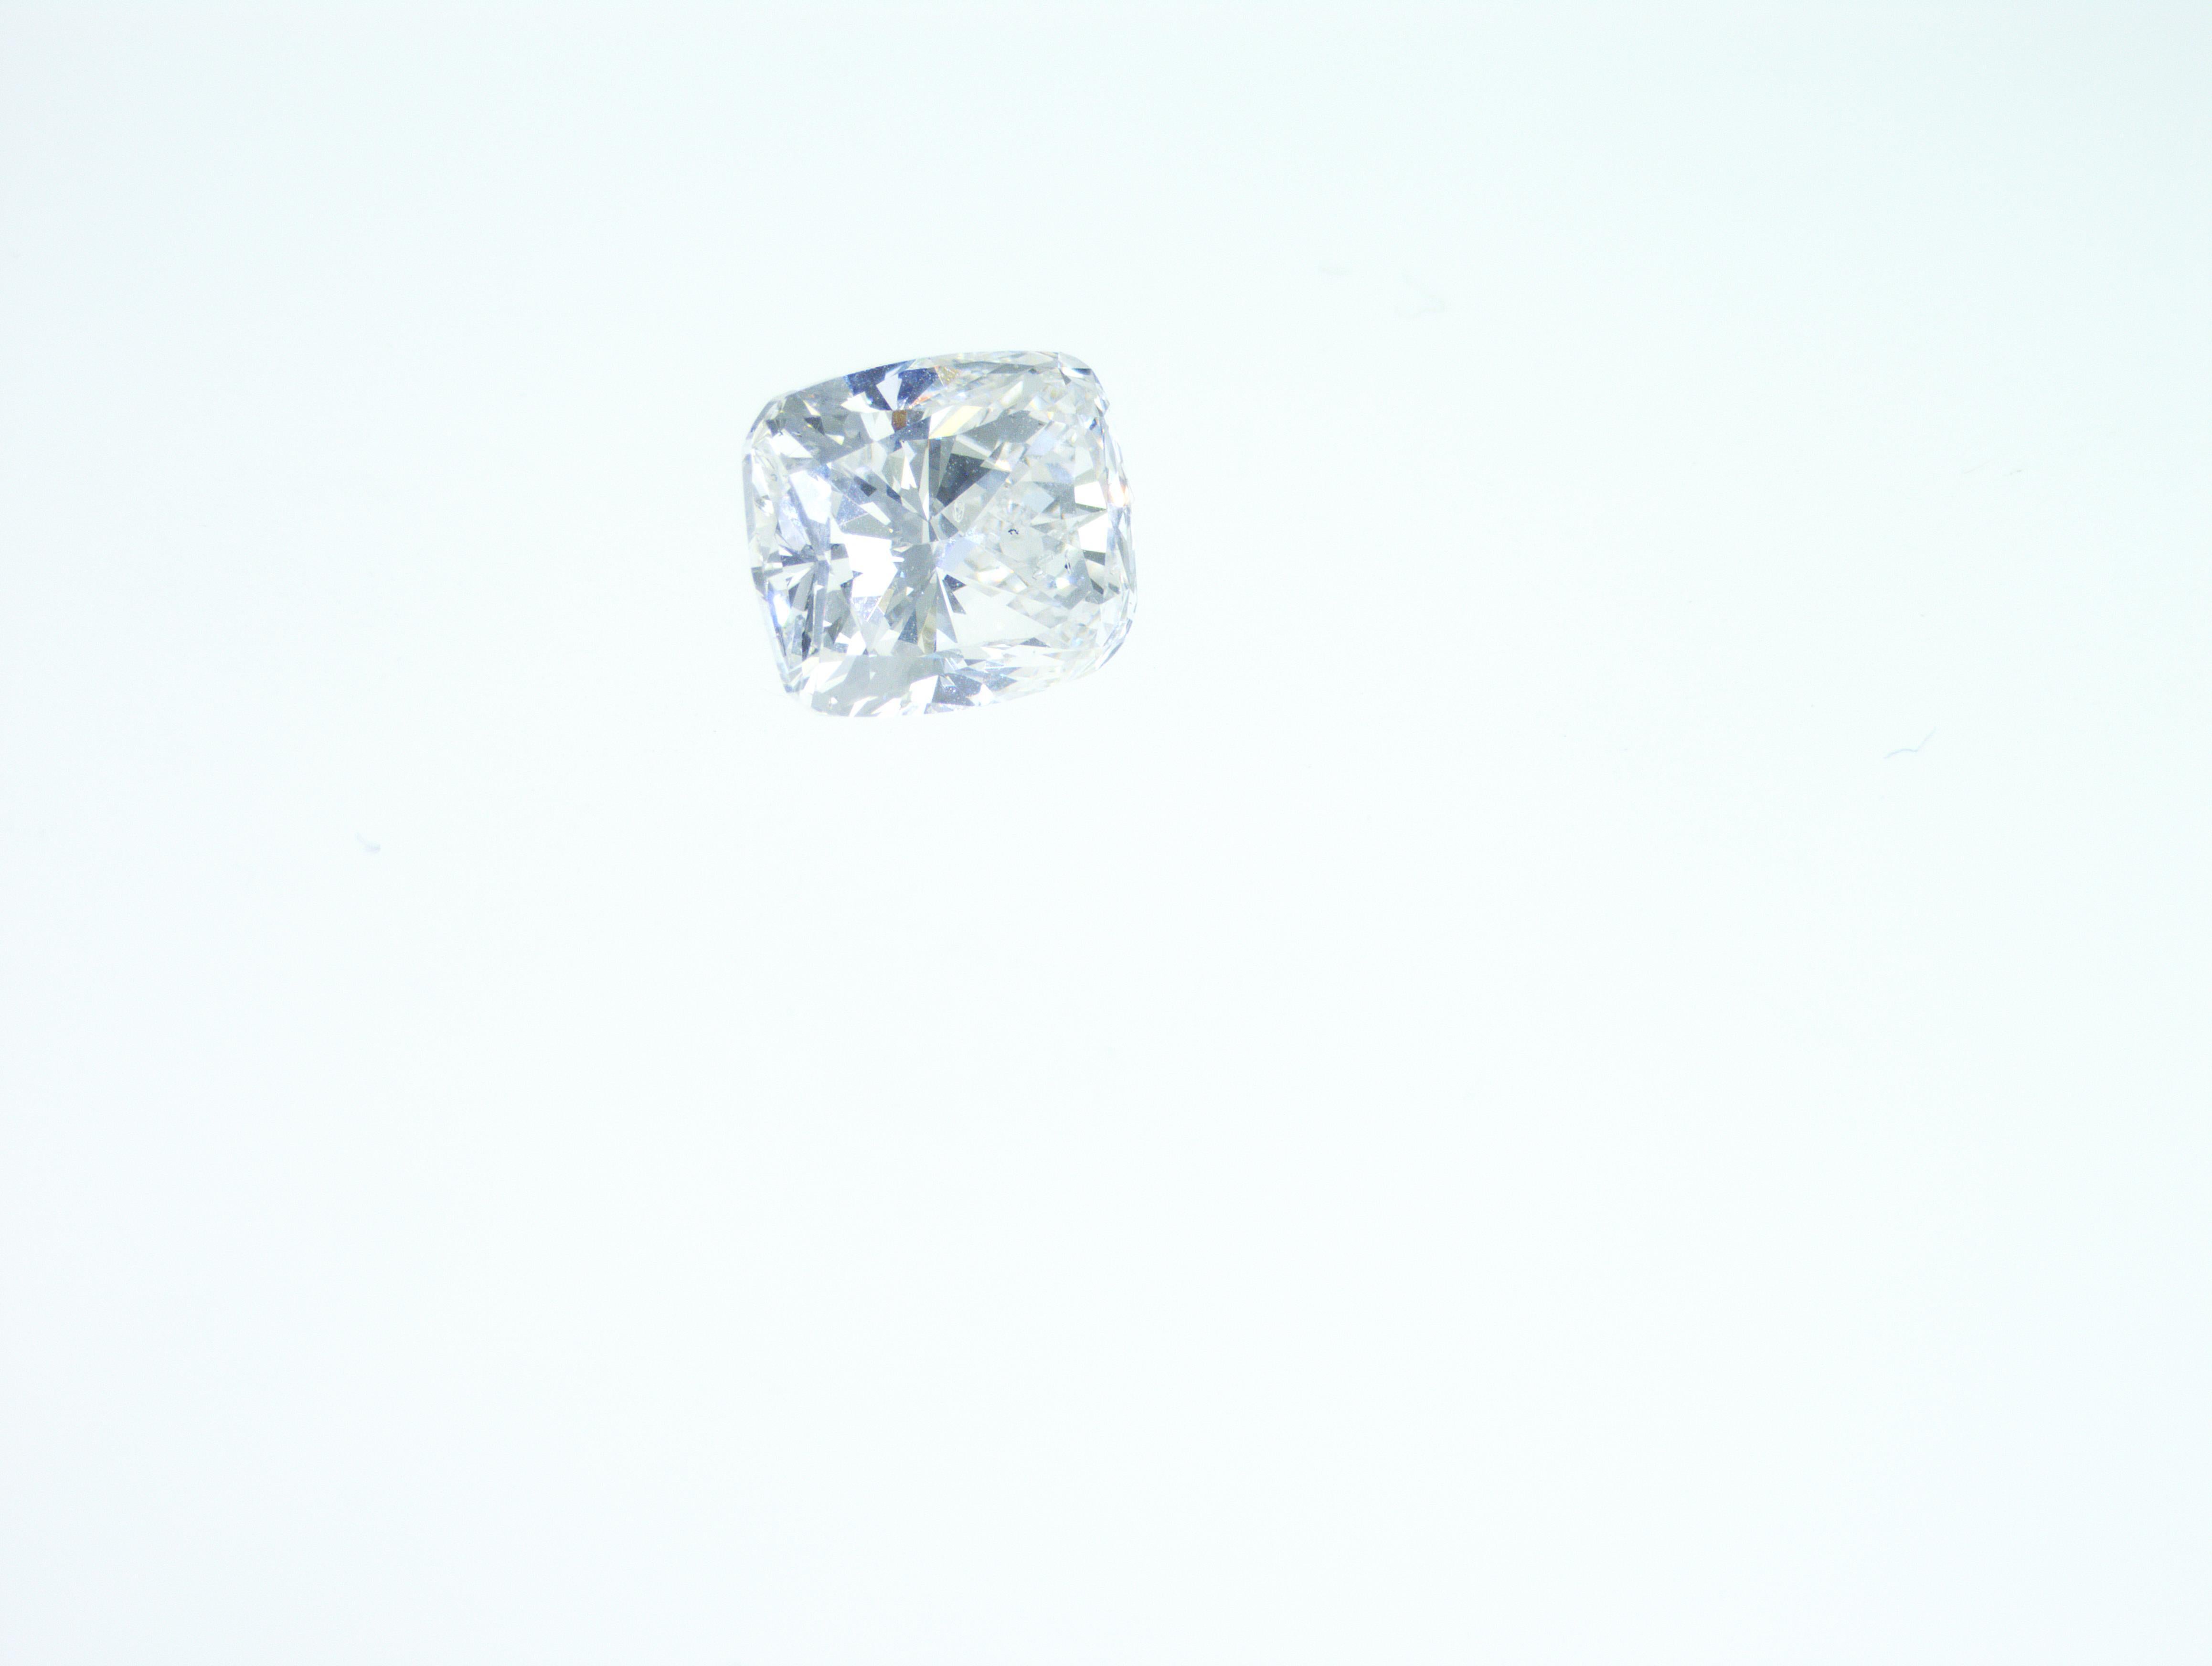 Natural Diamond colour E (exceptional white), clarity SI1, certified by HRDAntwerp, weight 3.00 carat. Dimensions of the diamond is 9.10x7.28x5.44 mm - the dimensions of the diamond is excellent so diamond looks bigger than 3.00 carat.
Natural